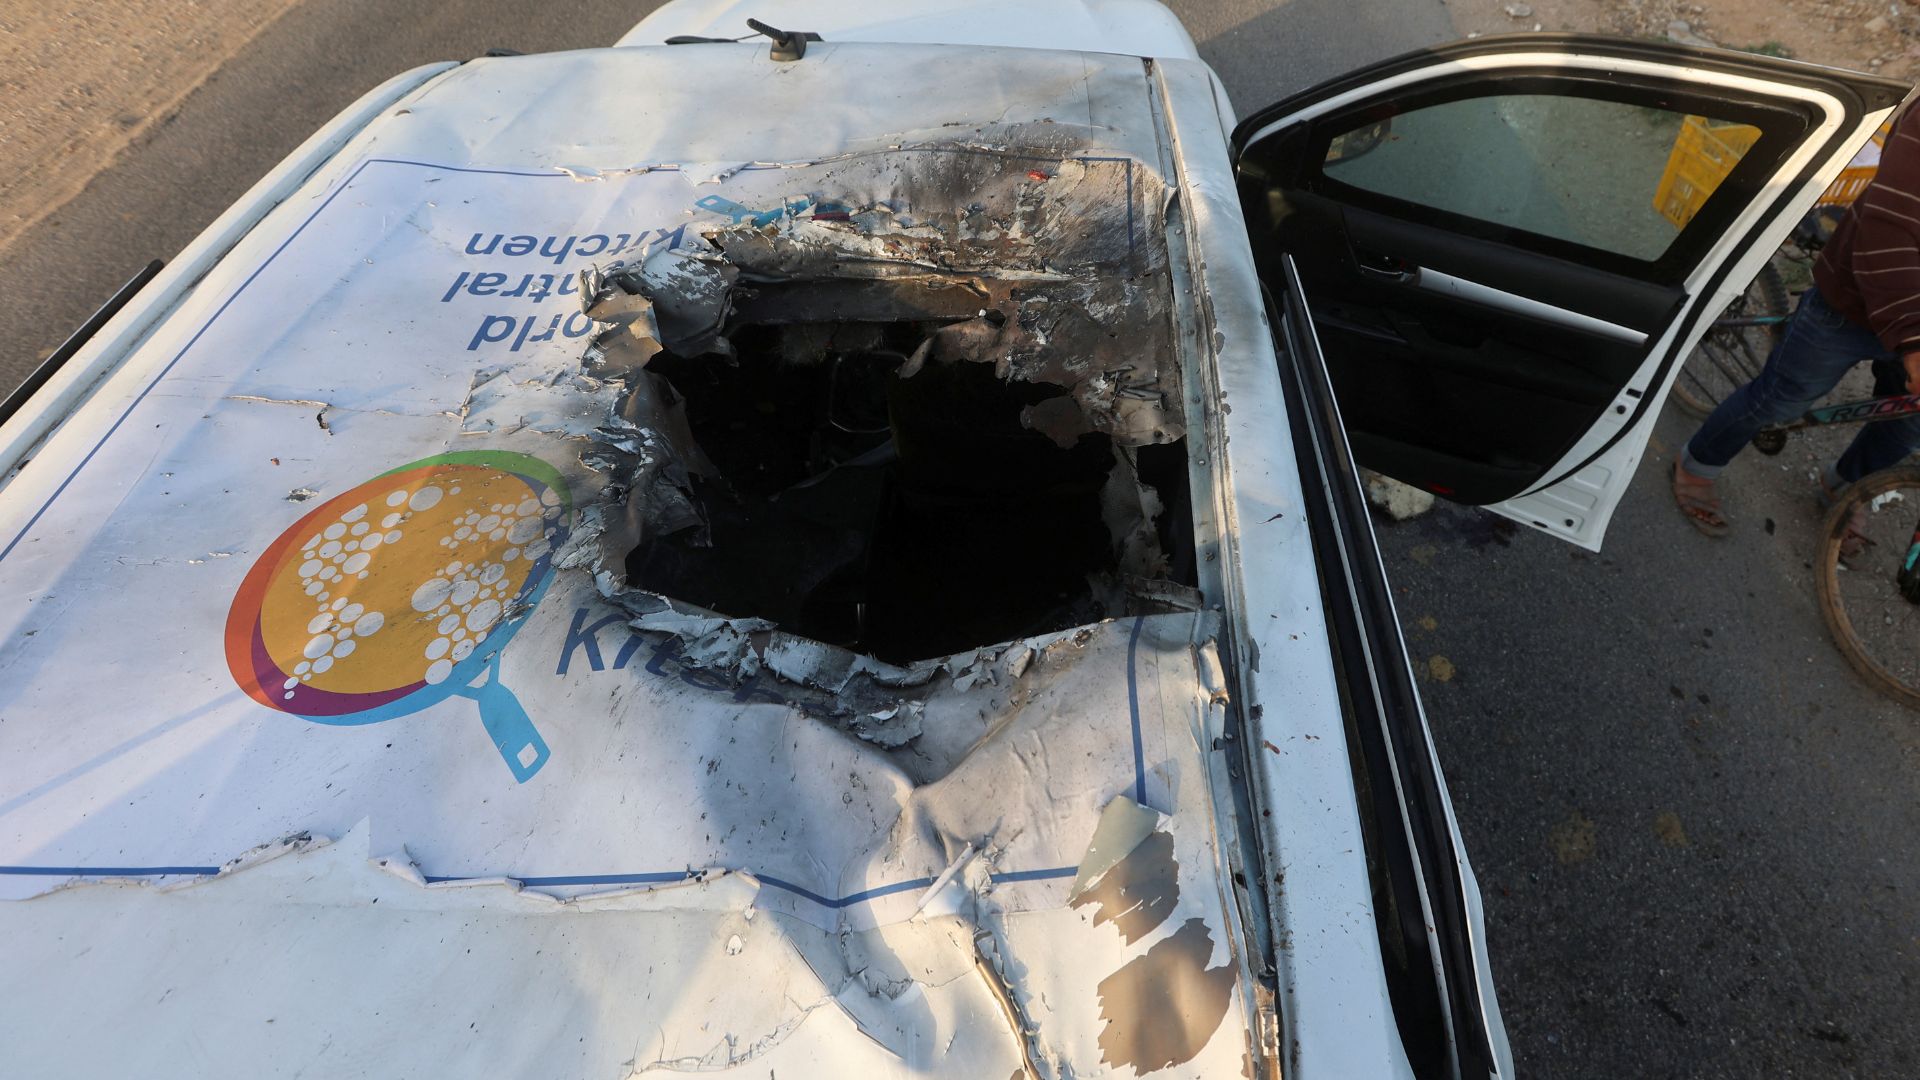 One of the charity aid vehicles destroyed during a lethal Israeli airstrike. /Ahmed Zakot/Reuters